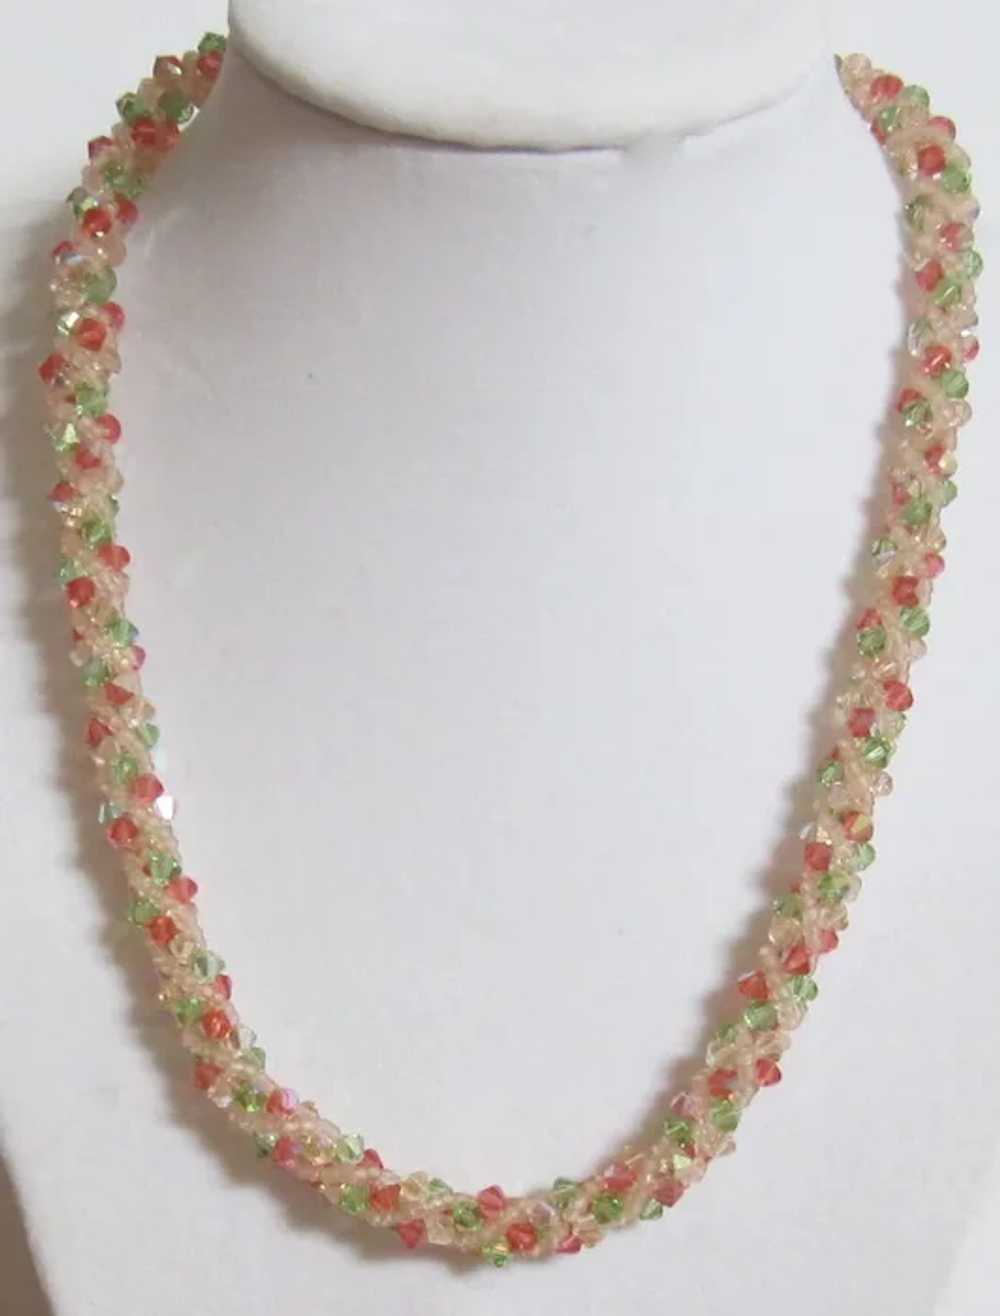 Vintage Glass Bead Necklace - image 6